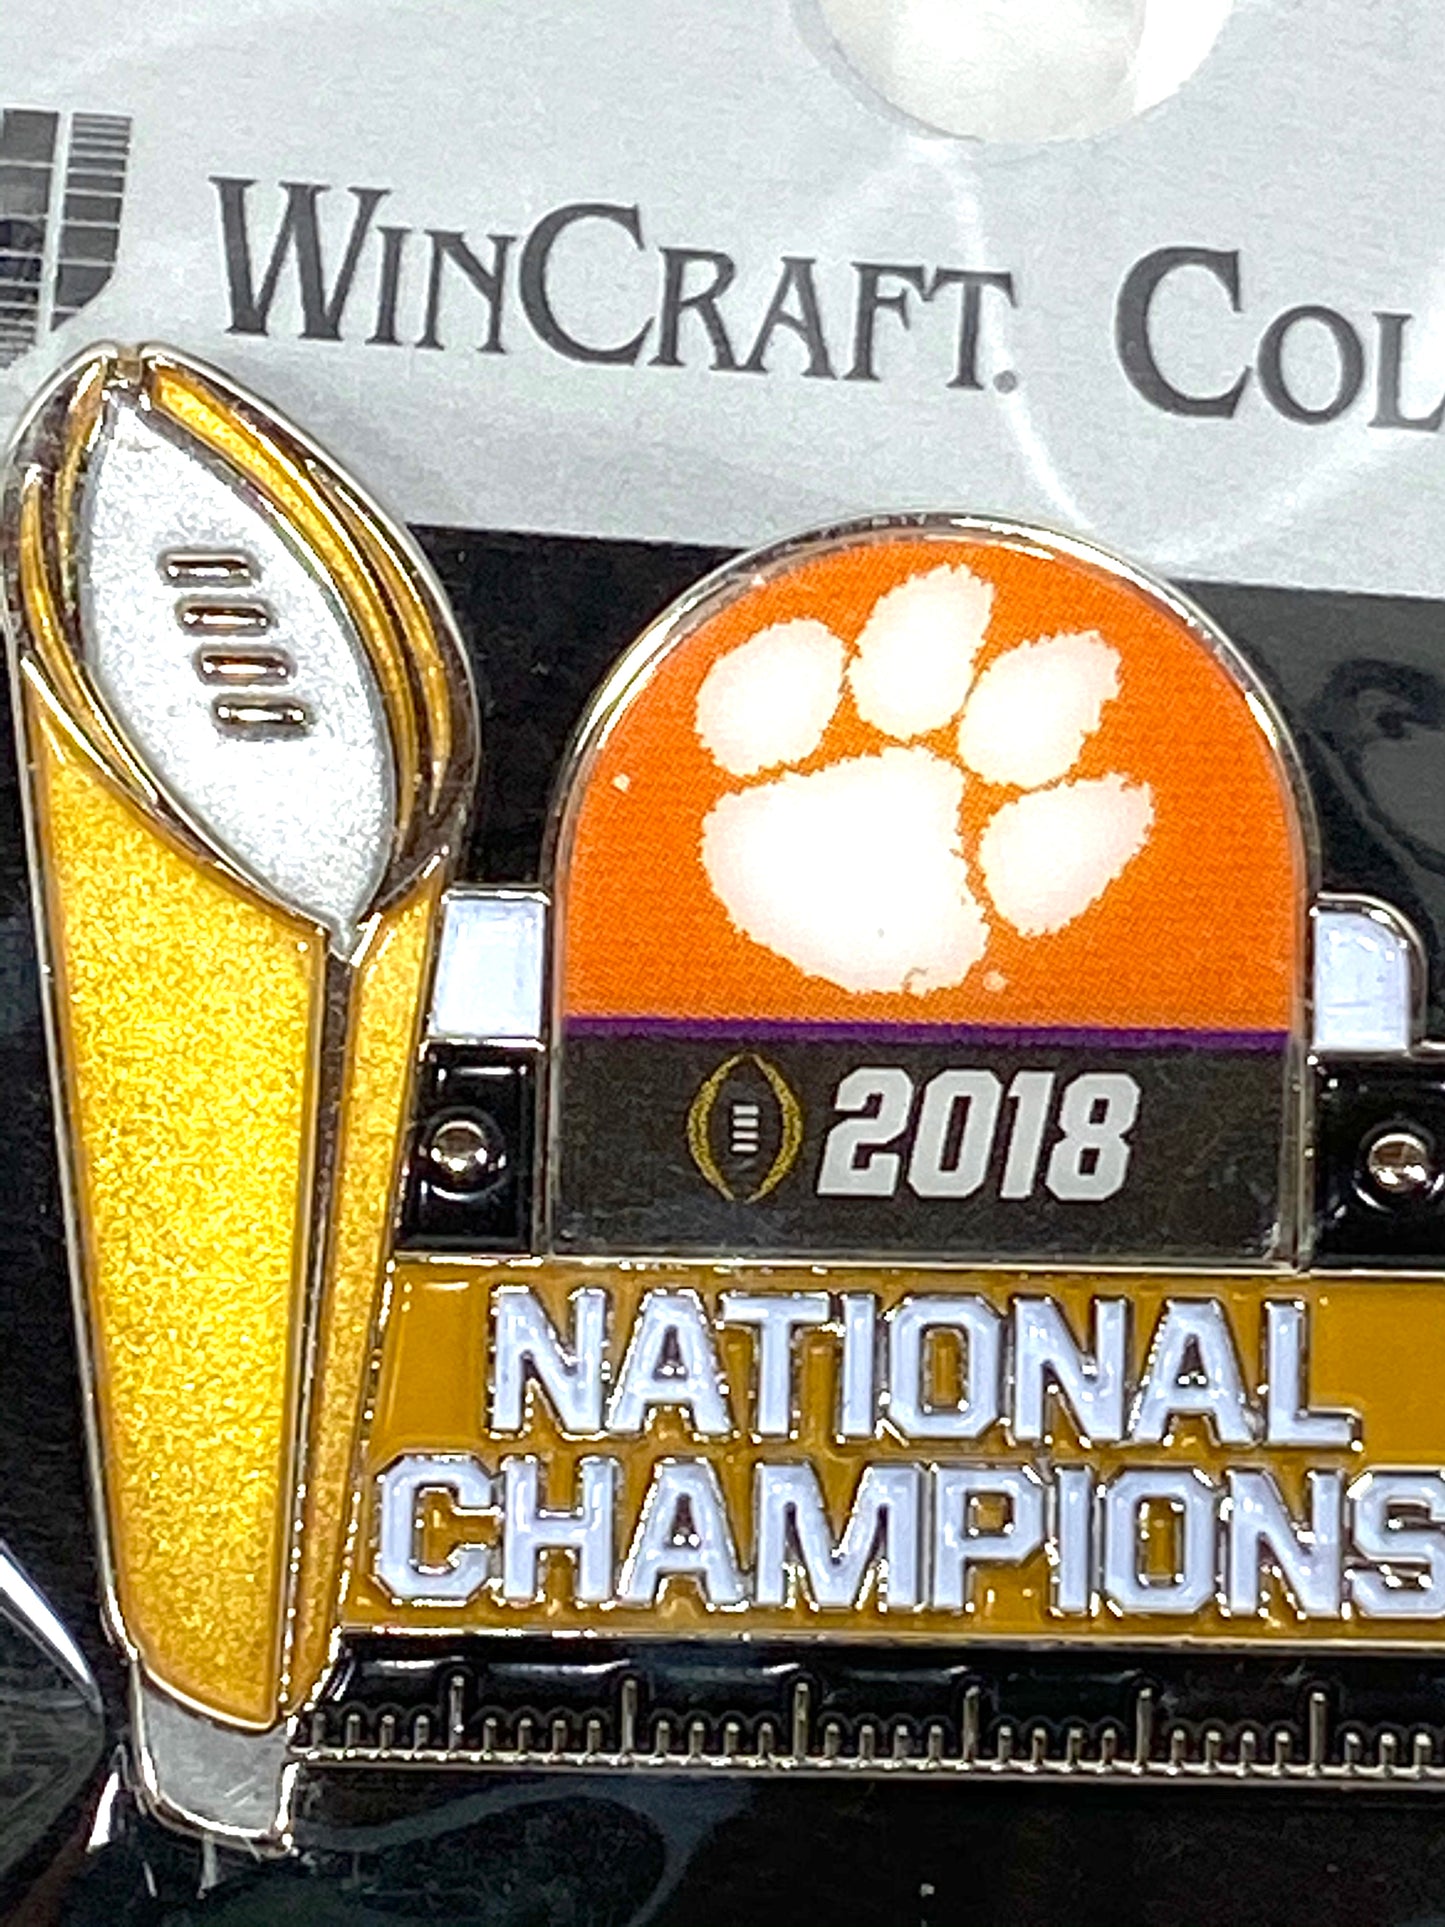 Clemson Tigers 2018 NCAA National Champions Collector Pin By Wincraft